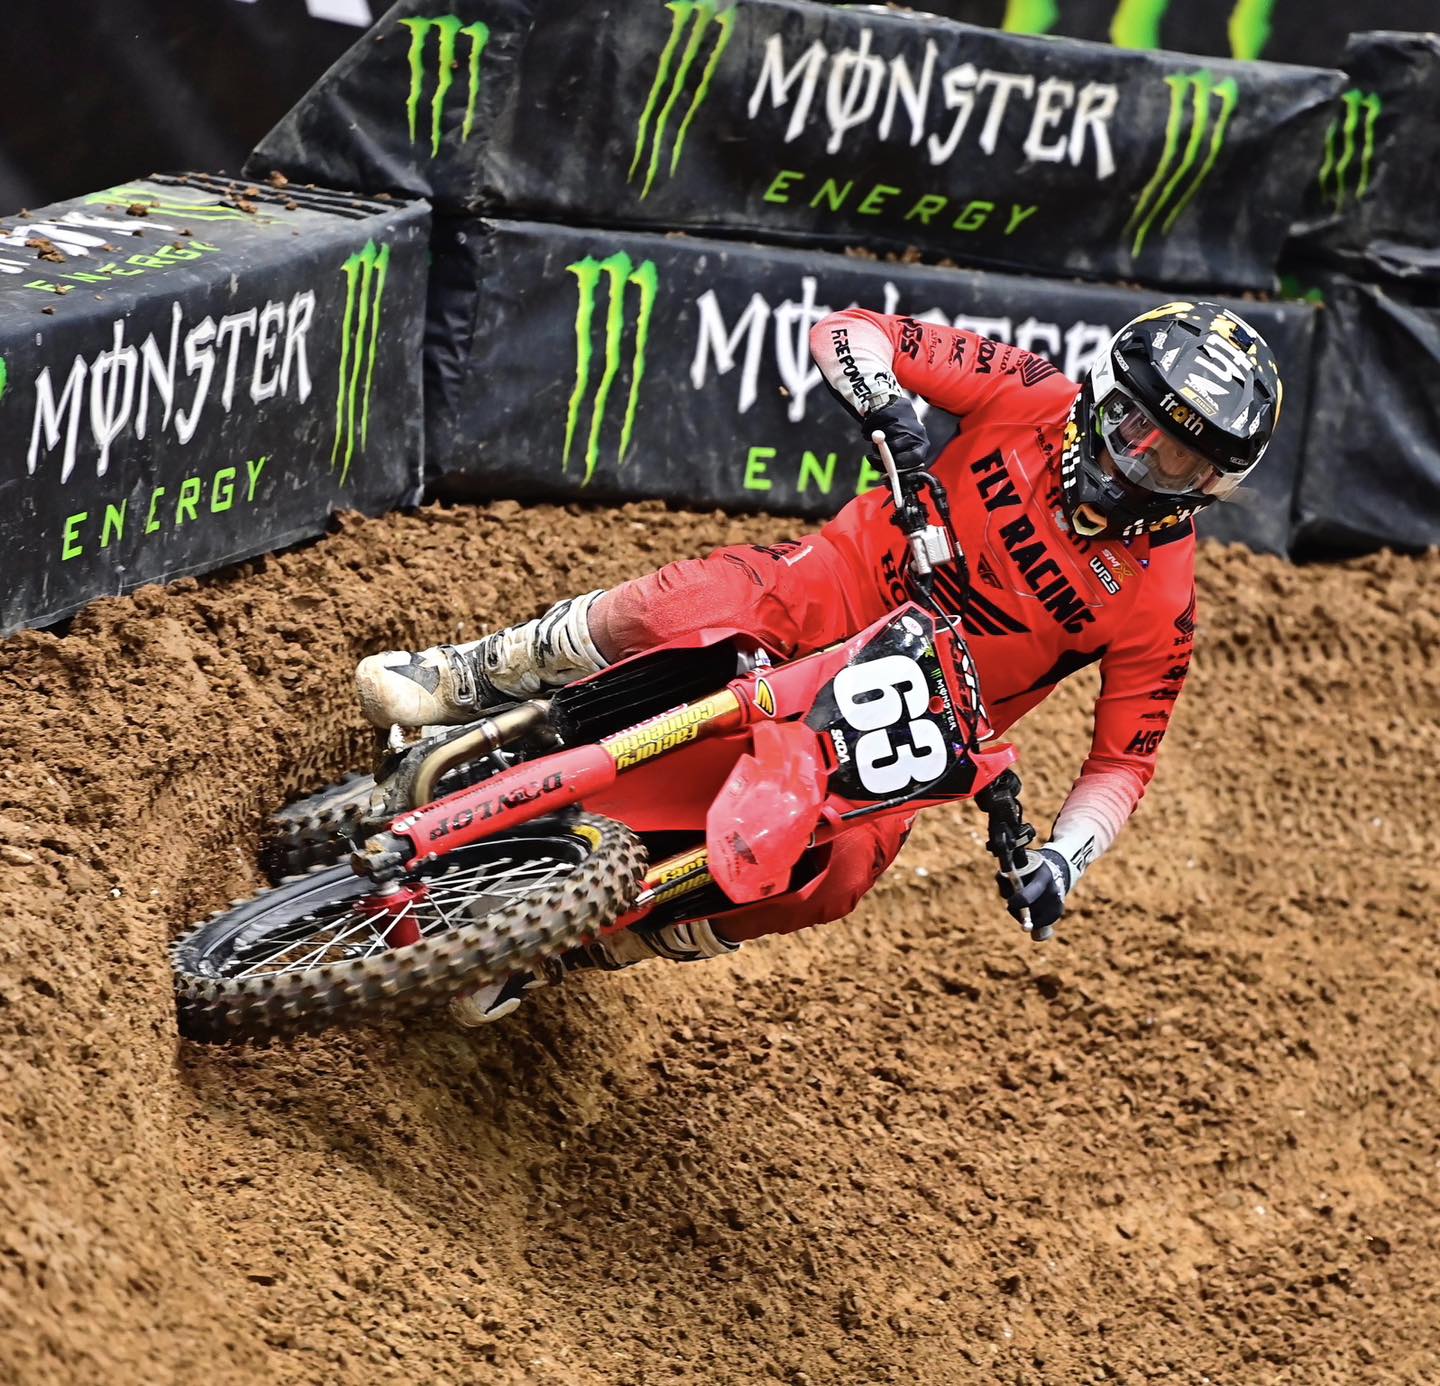 HIGHLIGHTS FROM HOUSTON AMA SUPERCROSS